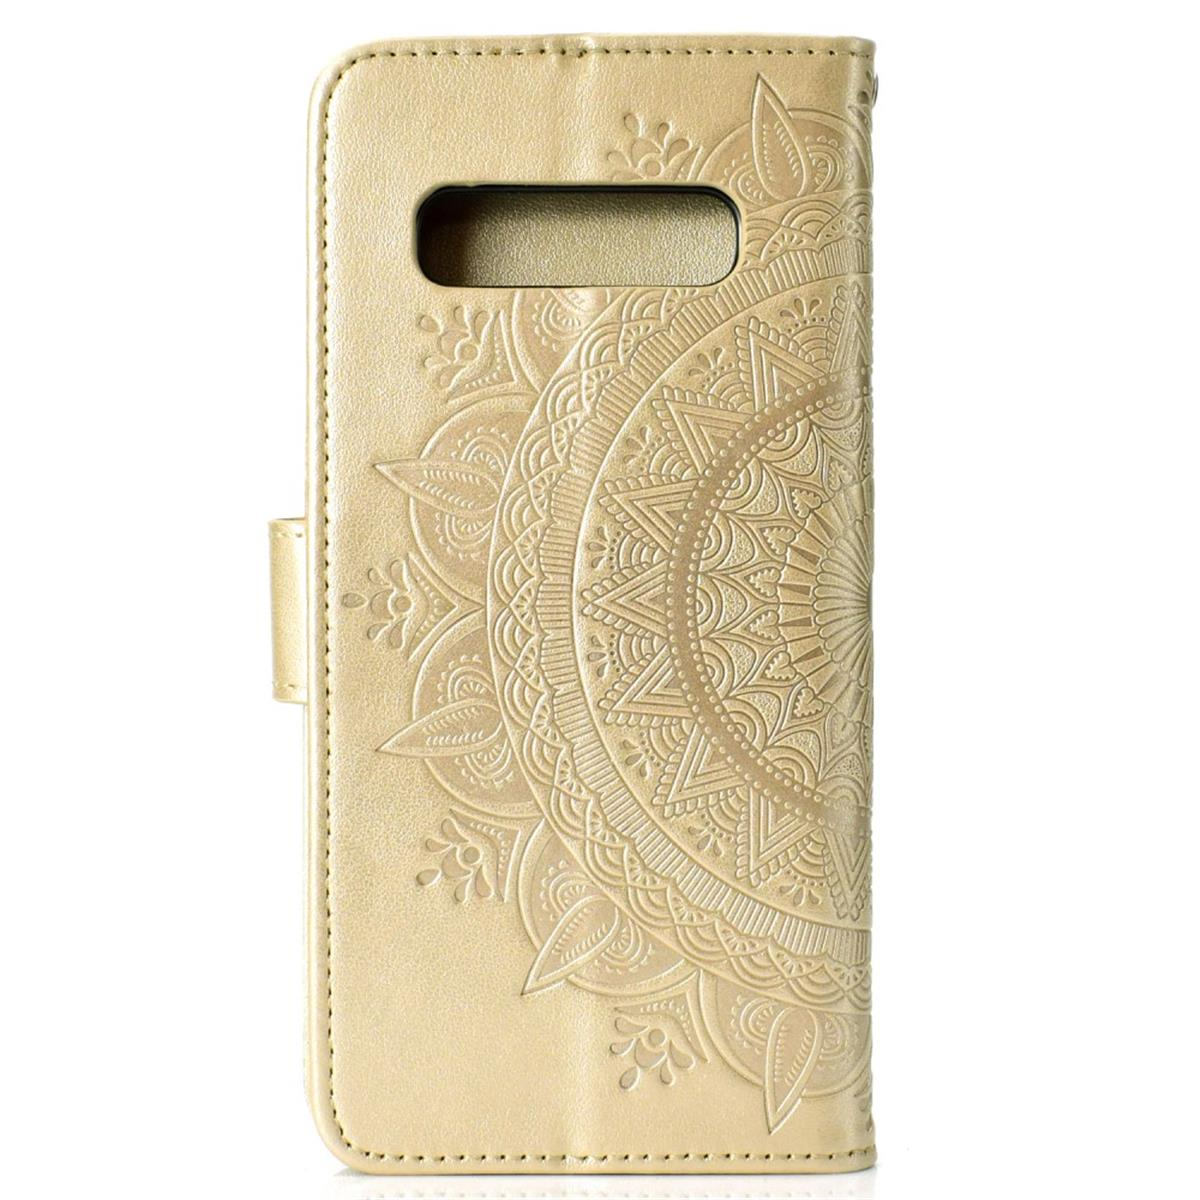 COVERKINGZ Klapphülle mit Galaxy S10+ [Plus], Mandala Gold Bookcover, Muster, Samsung